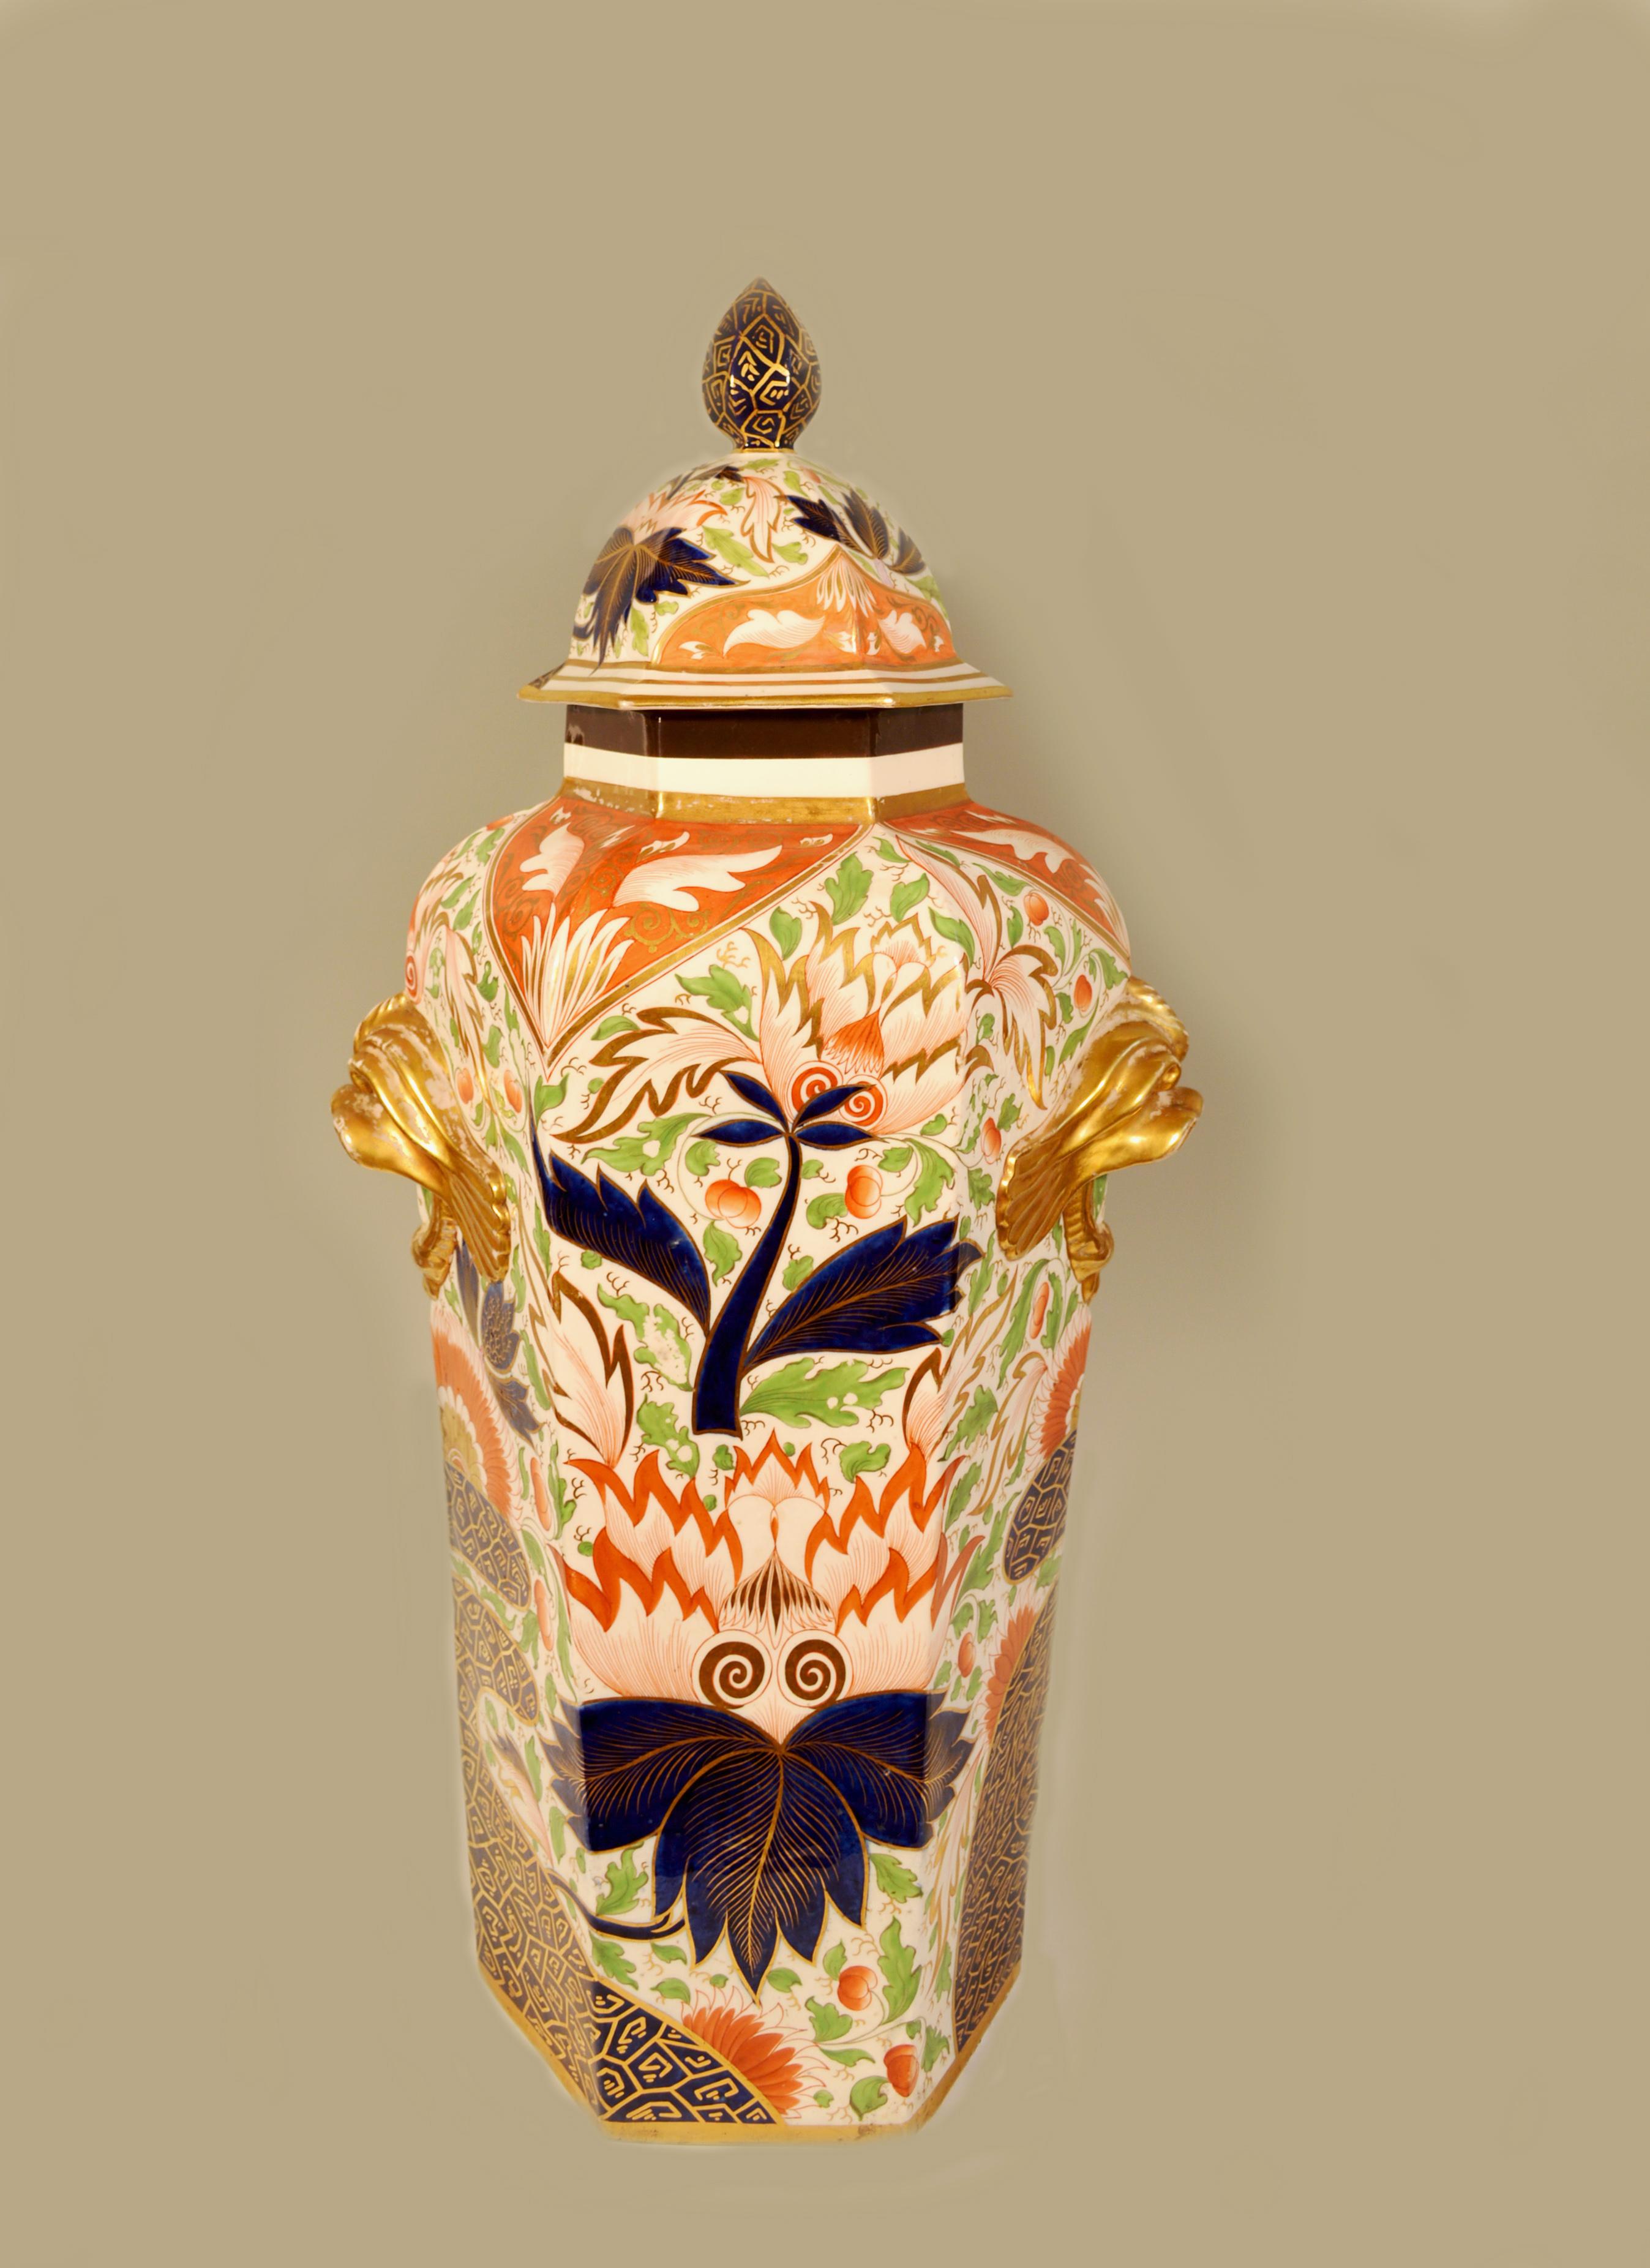 Regency Chamberlain Worcester Hexagonal Porcelain Imari large vase,
Finger & Thumb Design,
circa 1800-1820.

The large Chamberlain's Worcester porcelain covered vase or jar and cover has a hexagonal-shape and is fully covered with a Japan